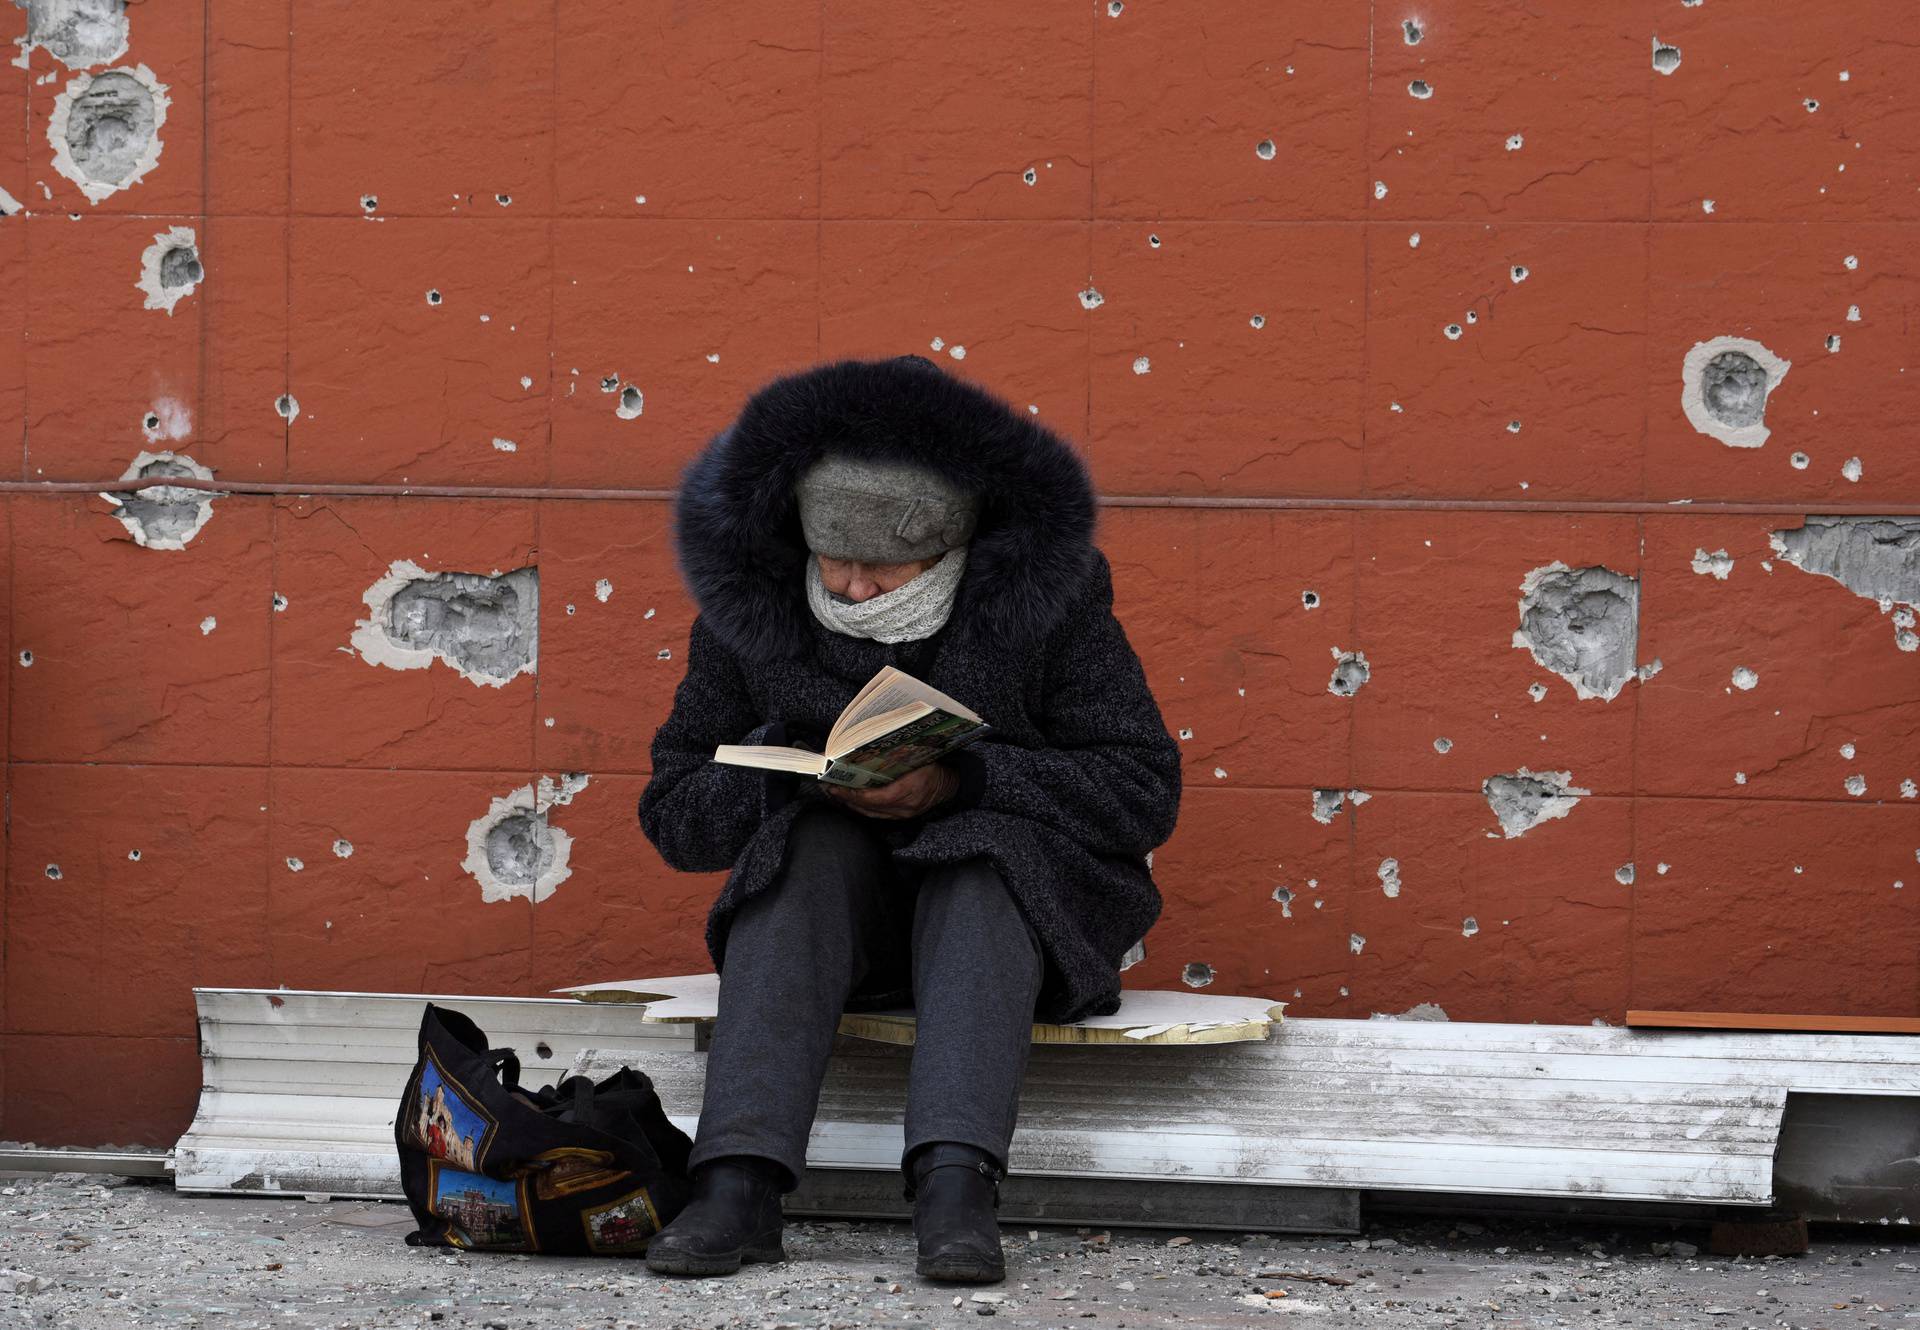 A local resident reads a book near a damaged building in Mariupol